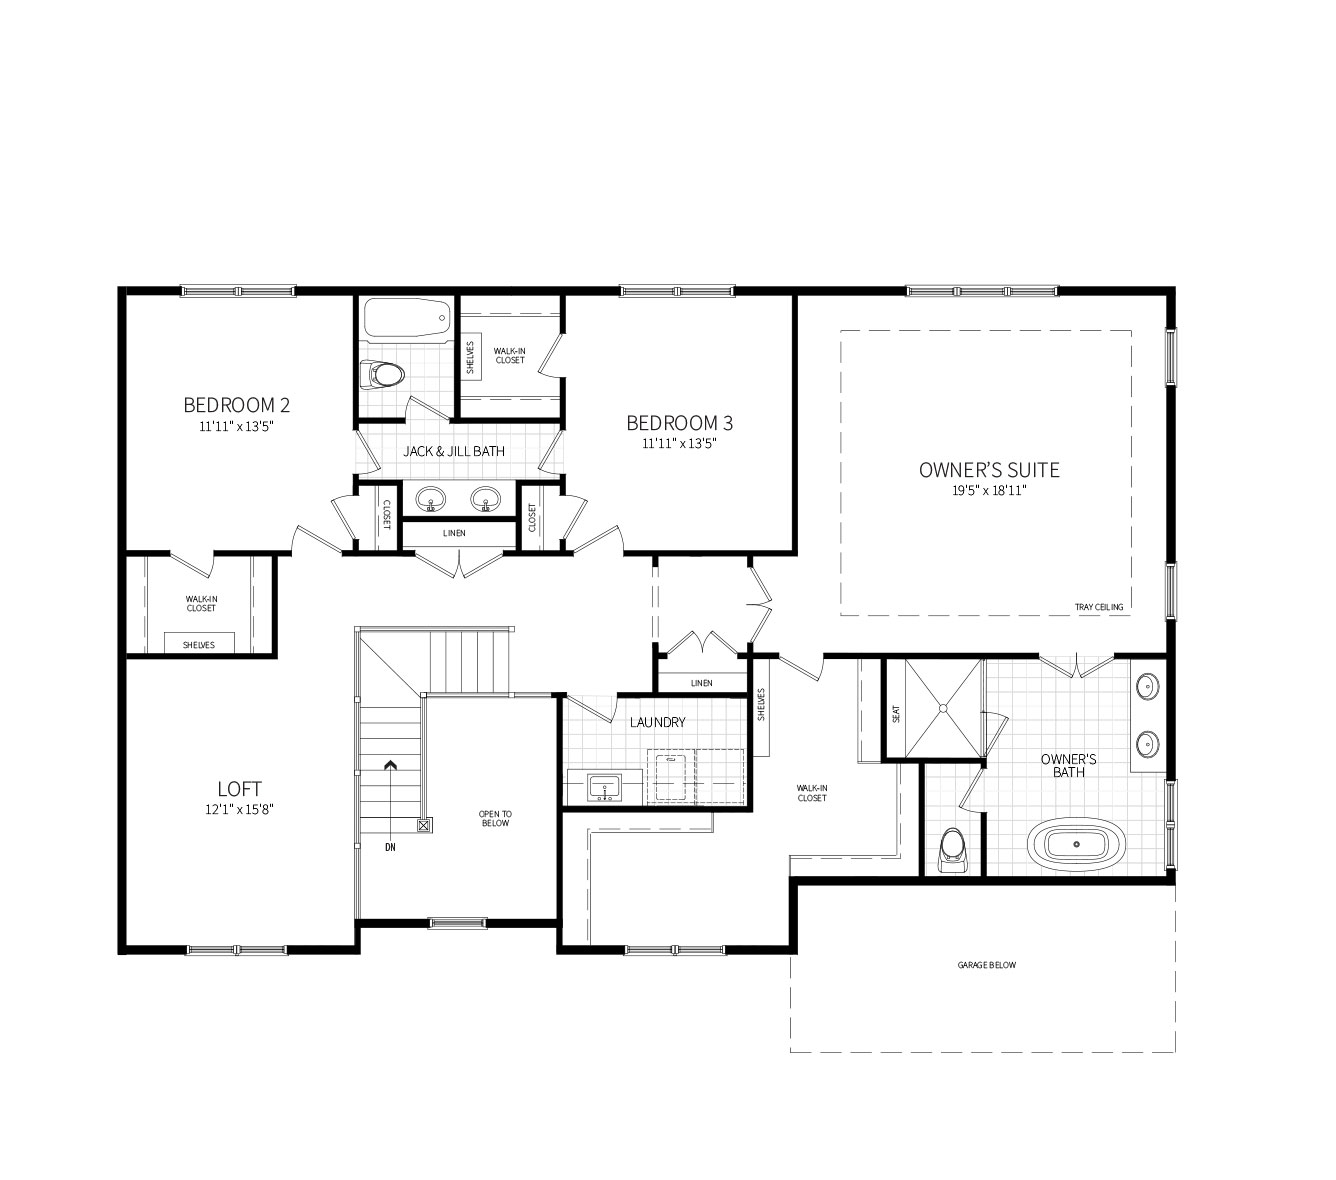 The second floor plan for the Clifton model, featuring Owner's Suite, Loft and two additional bedrooms with shared bath.